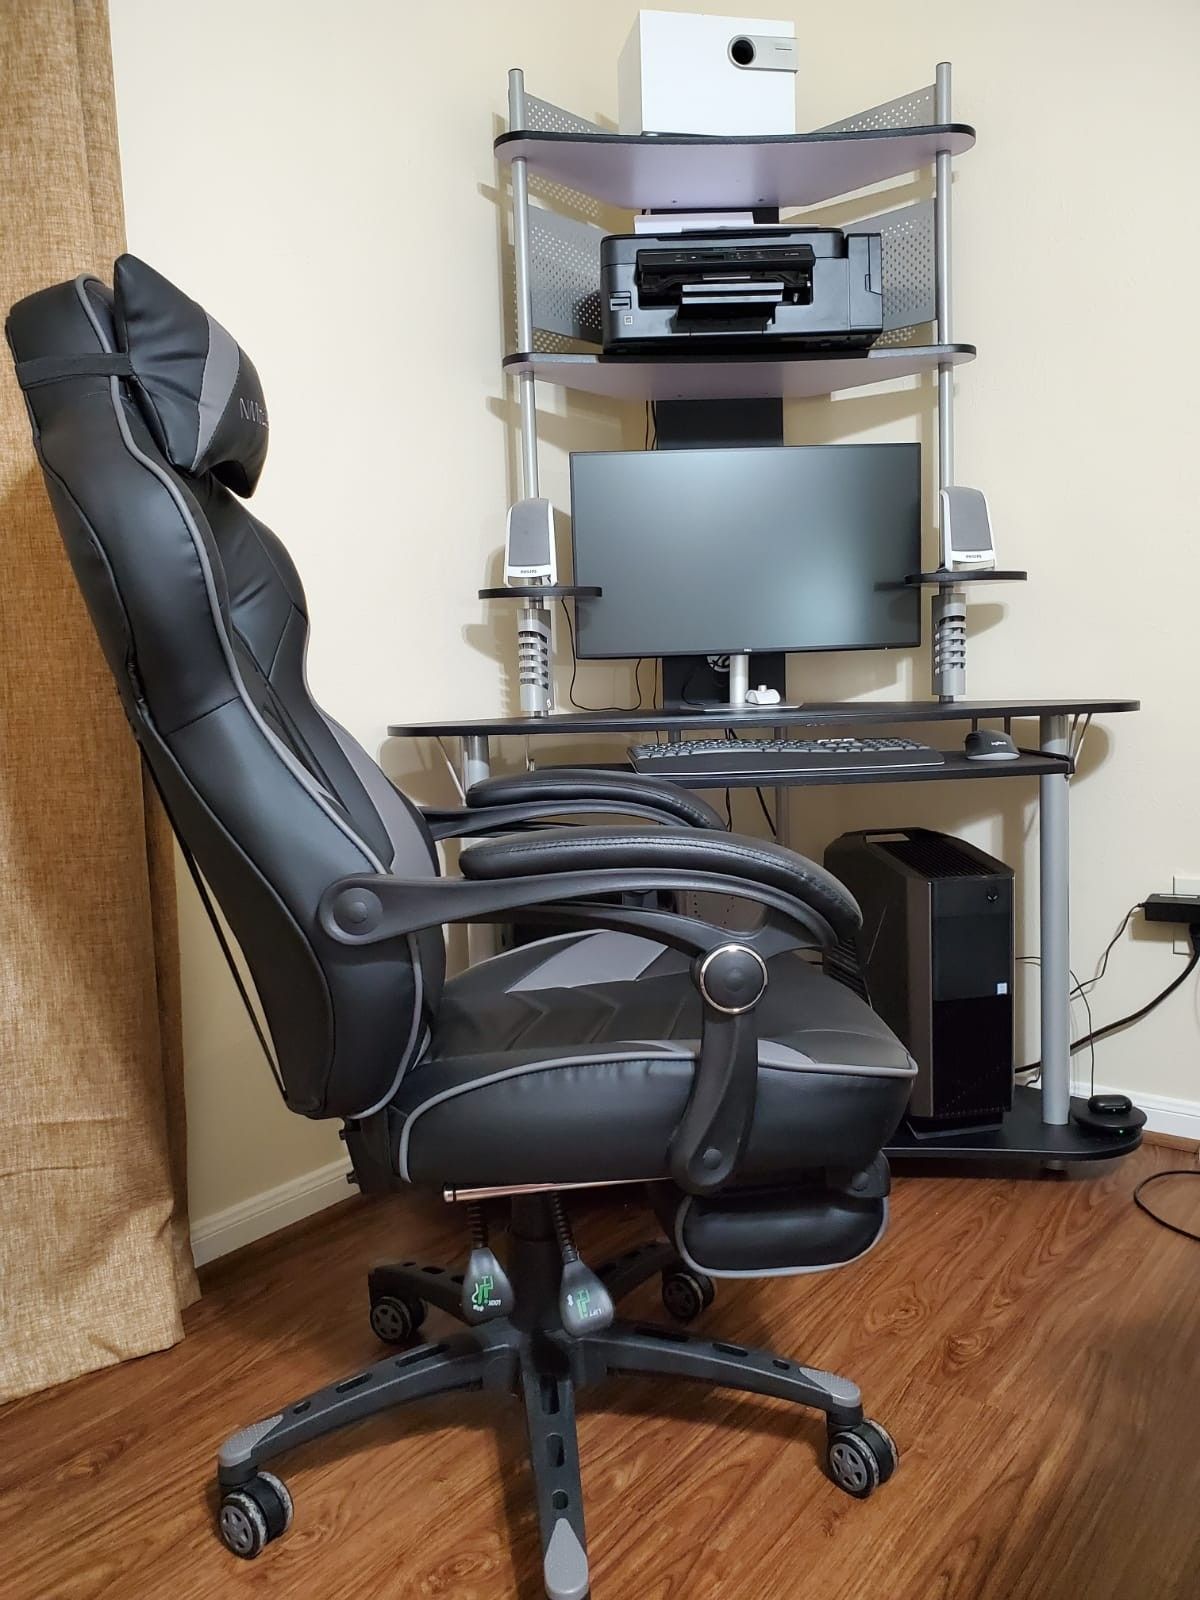 Desktop computer with table and chair included.